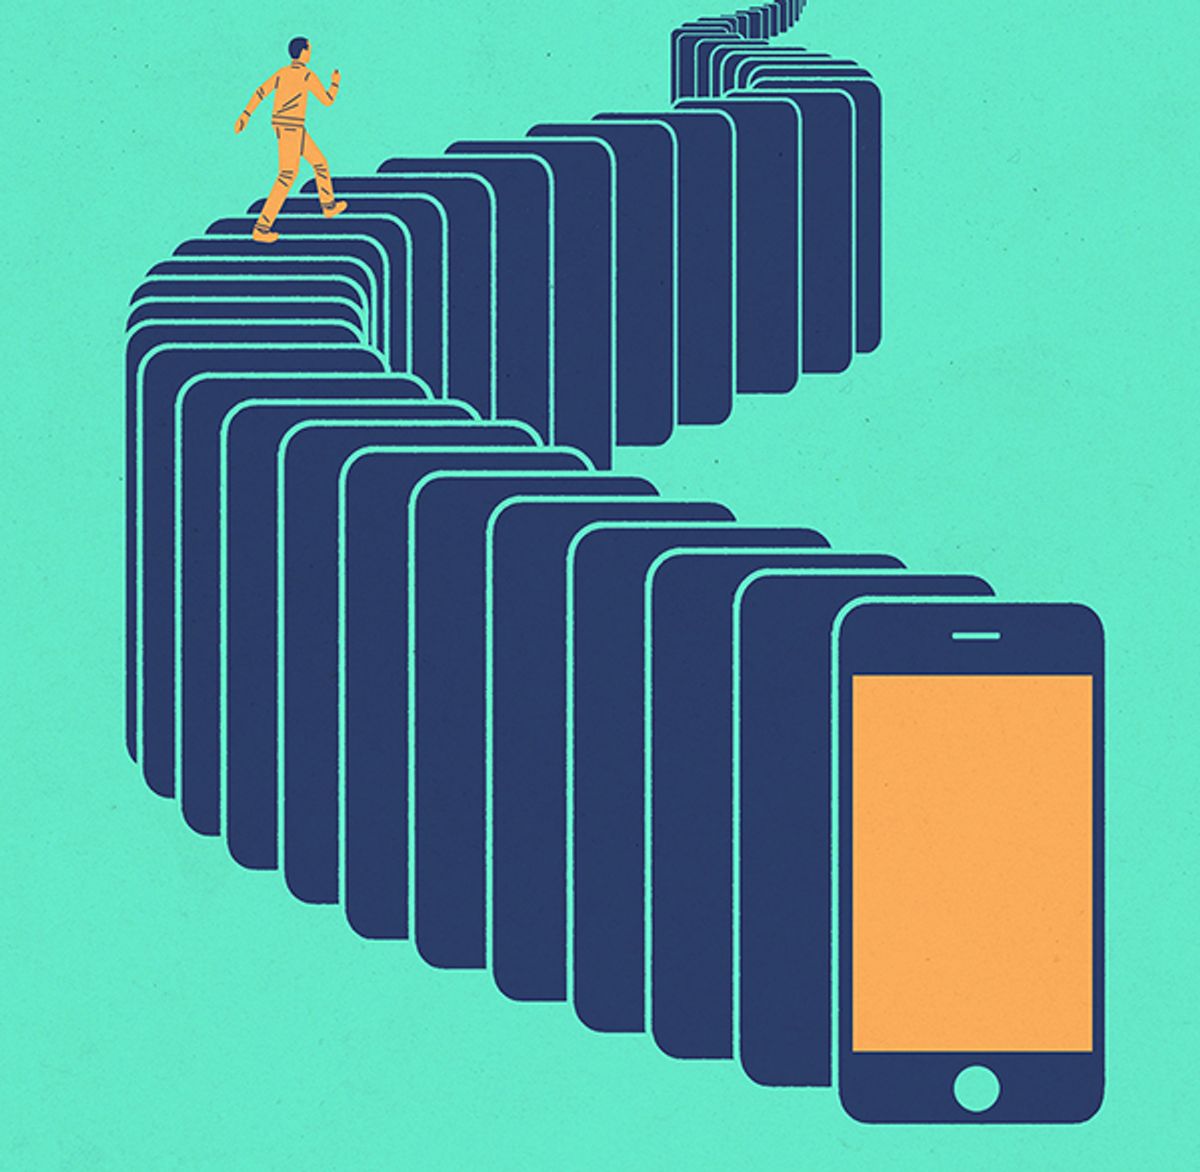 Illustration of a person walking up stairs made of smart phones.